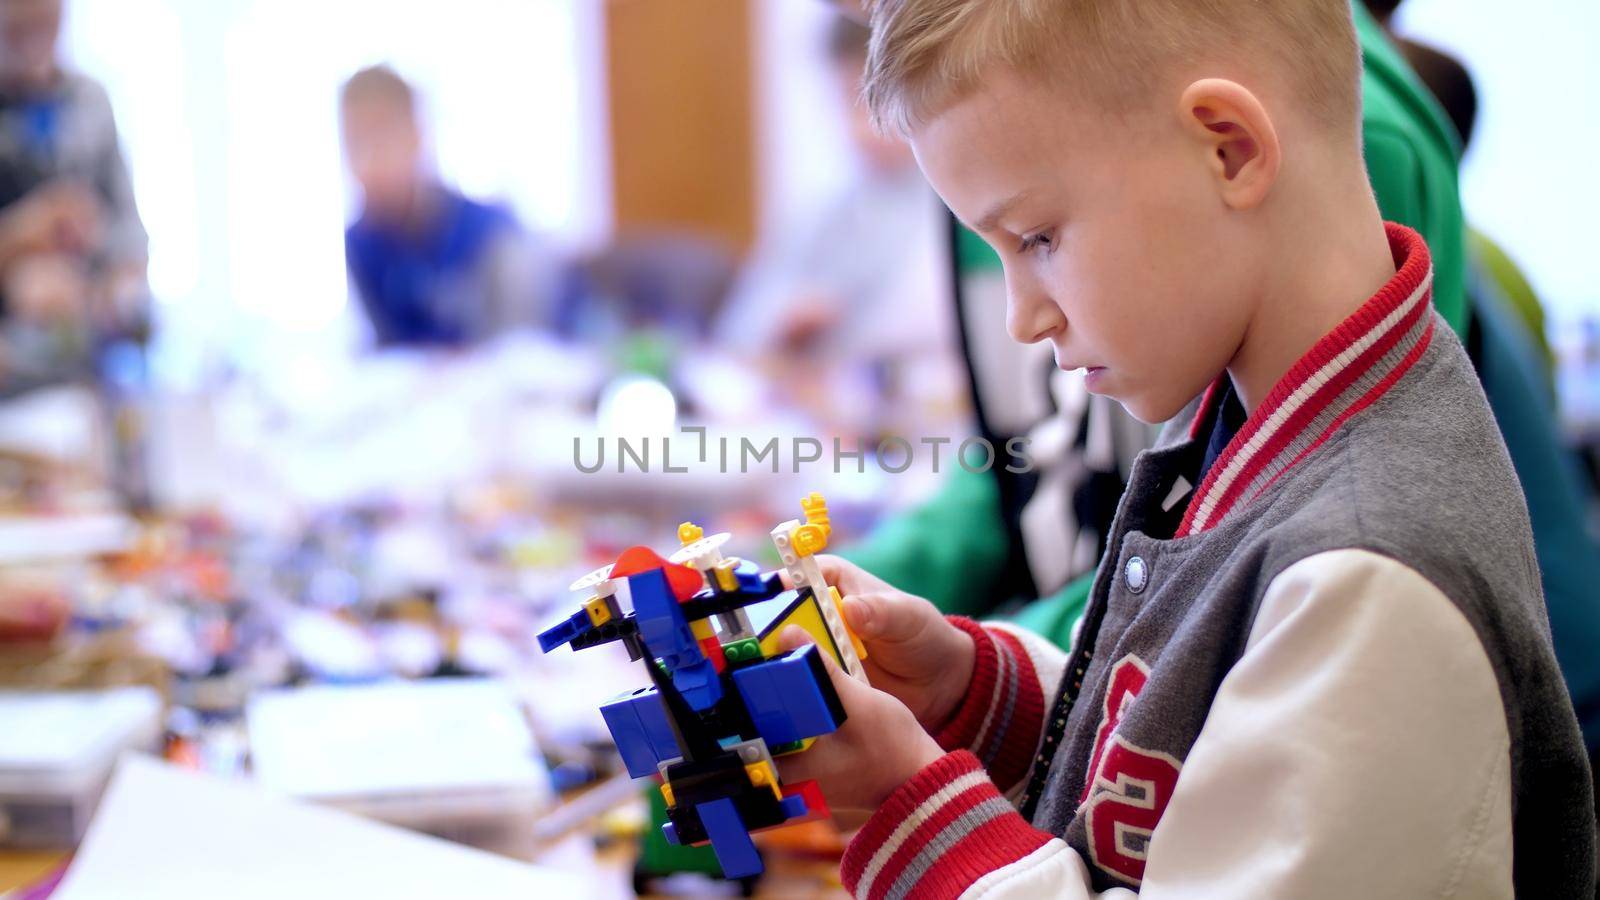 the boy of 10 years, plays in the designer from cubes, plates, circuits, wires. a small inventor creates robots, machines from different parts of the designer. High quality photo